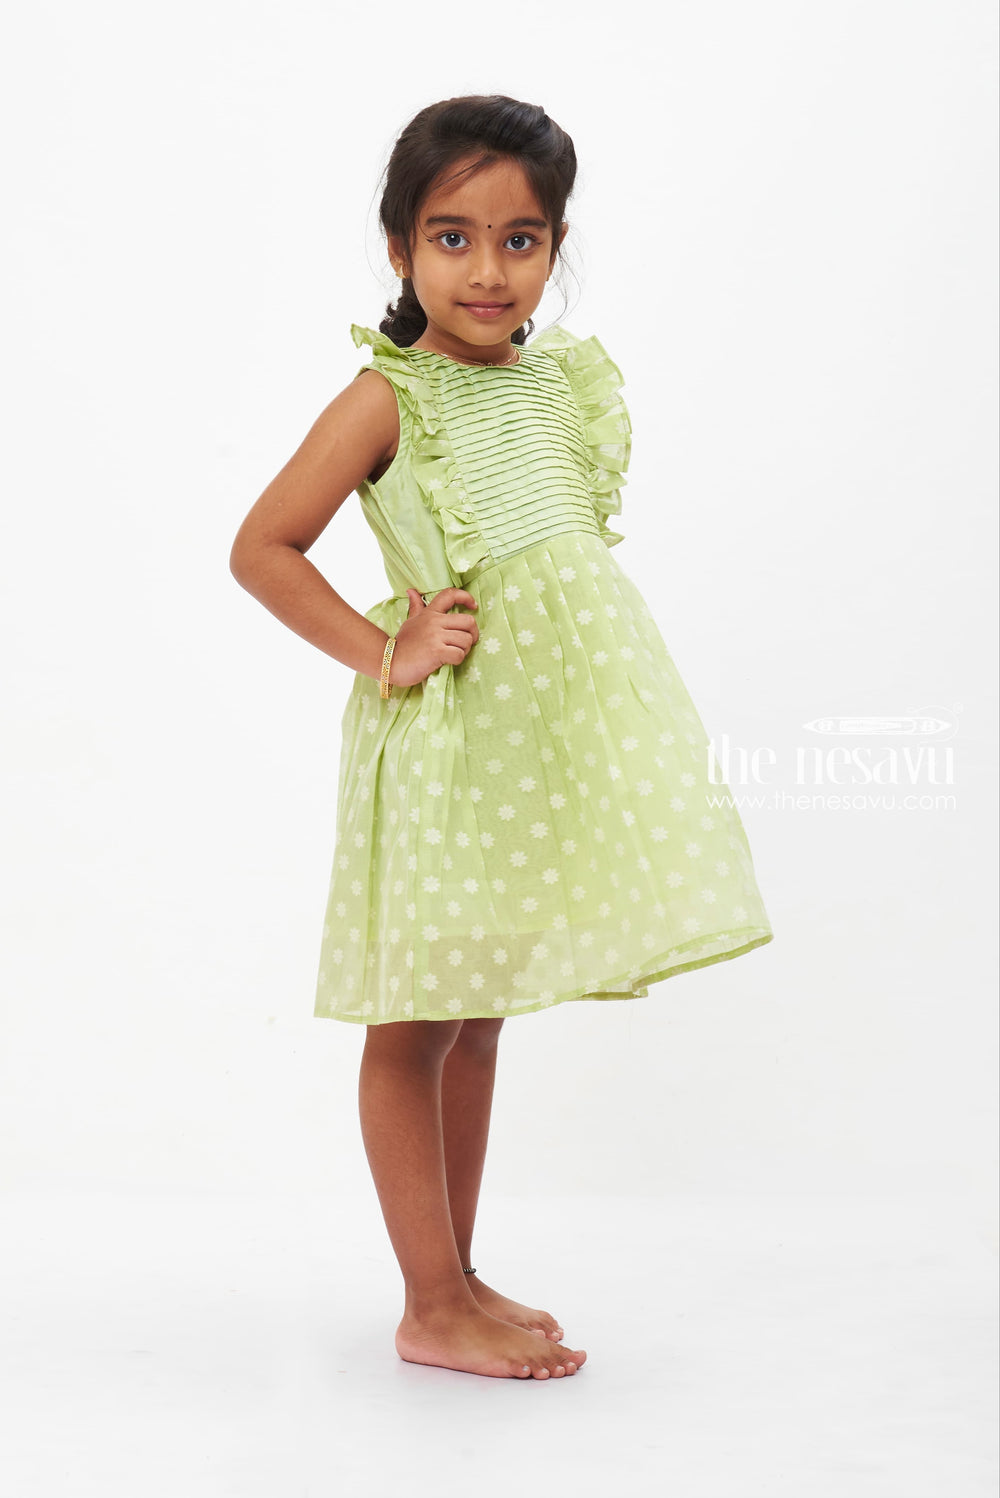 The Nesavu Baby Cotton Frocks Spring Green Flutter Sleeve Dress with White Floral Pattern Cotton Frock for Girls Nesavu Girls Spring Green Floral Dress with Flutter Sleeves | The Nesavu